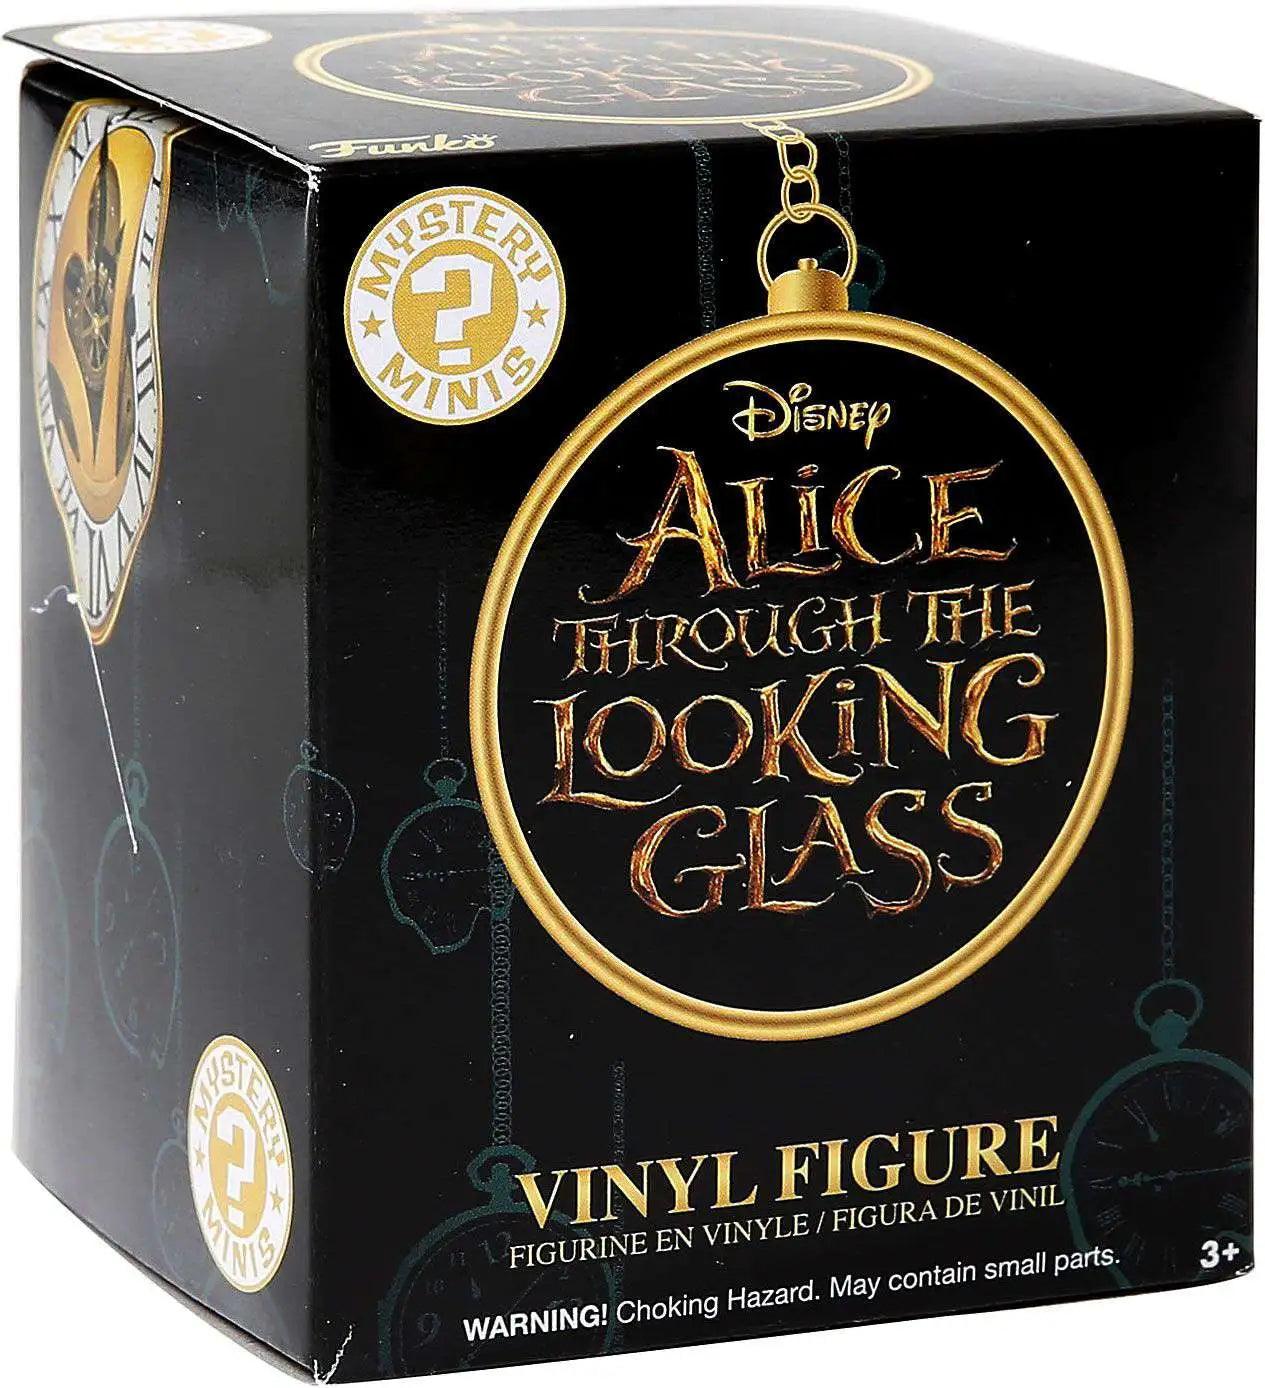 Mystery Minis blind box - ALICE THROUGH THE LOOKING GLASS - Magic Dreams Store